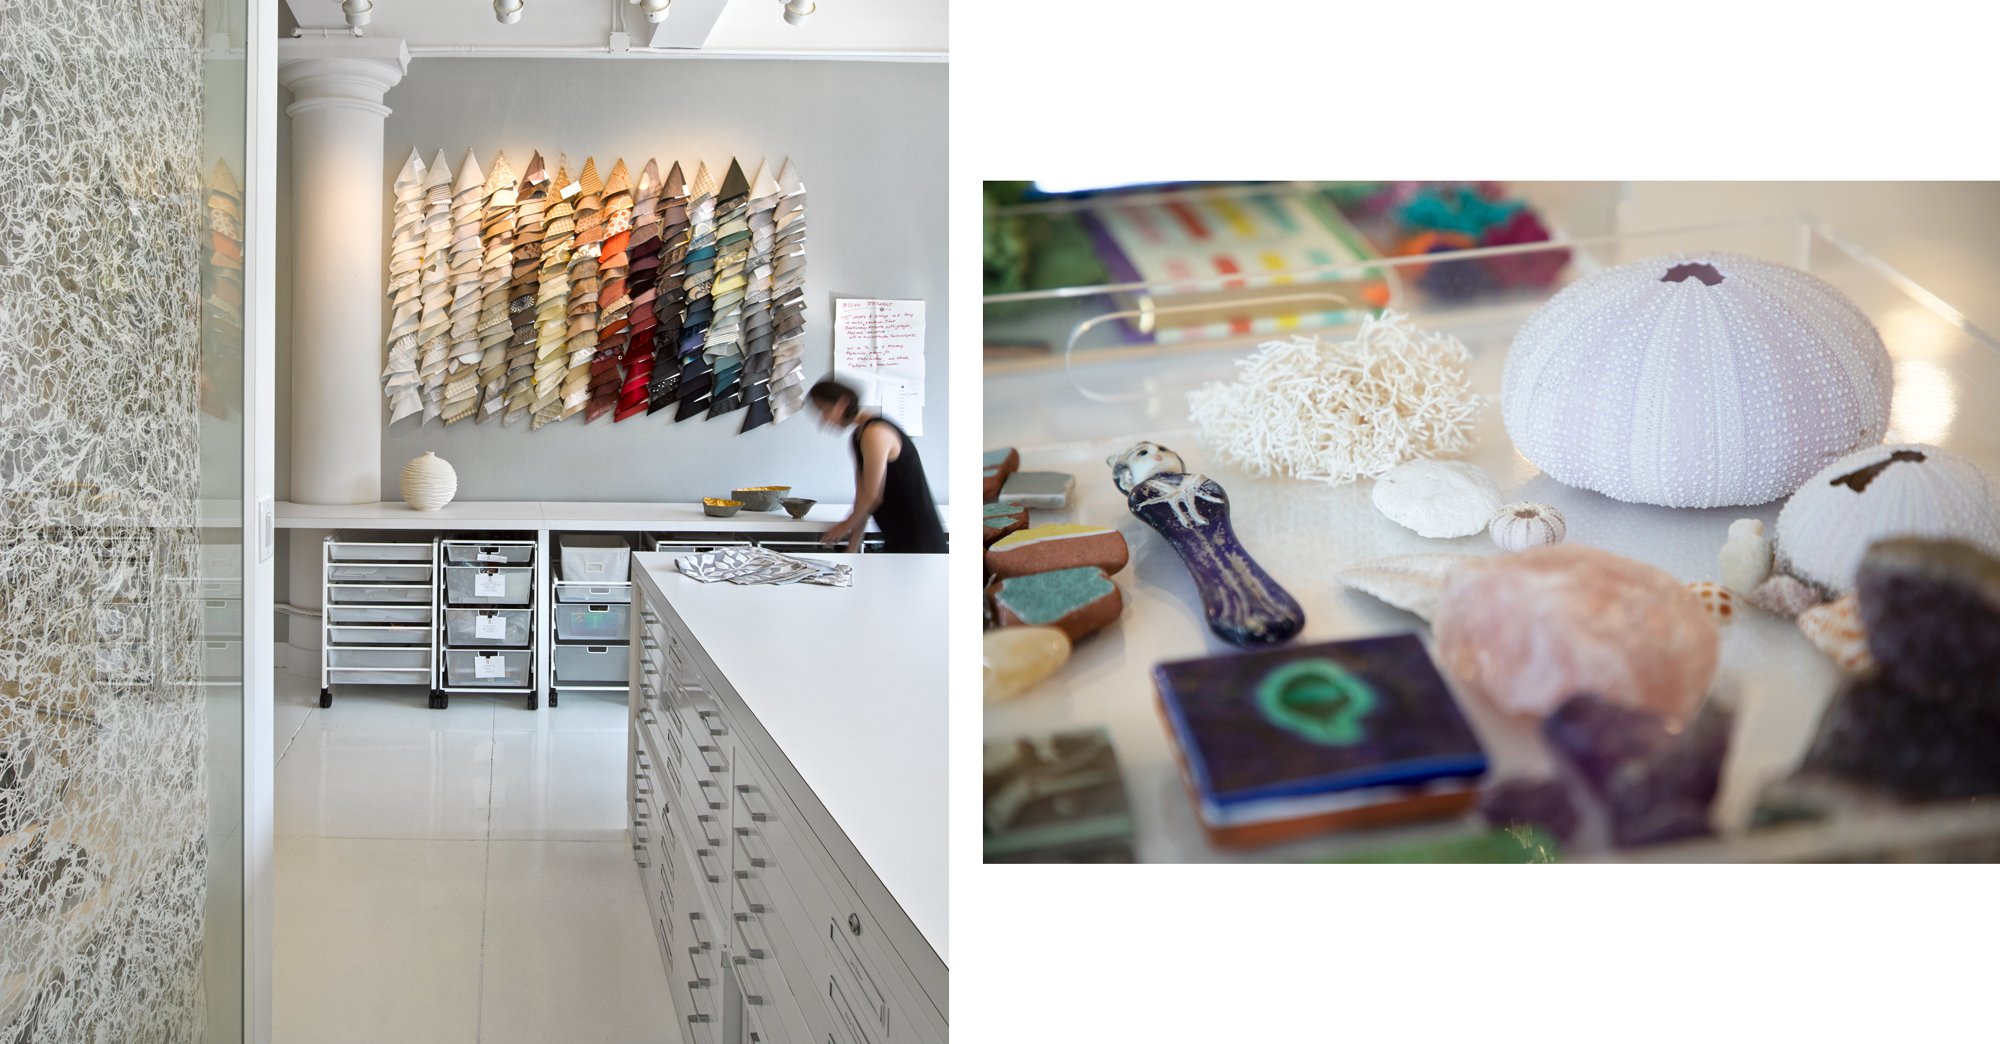 Two images. One on left is of someone working in a light and airy study with lots of drawers and bins and organized swatches on wall. On right is a closeup of various objects from the sea, including a sea urchin shell and coral skeleton.